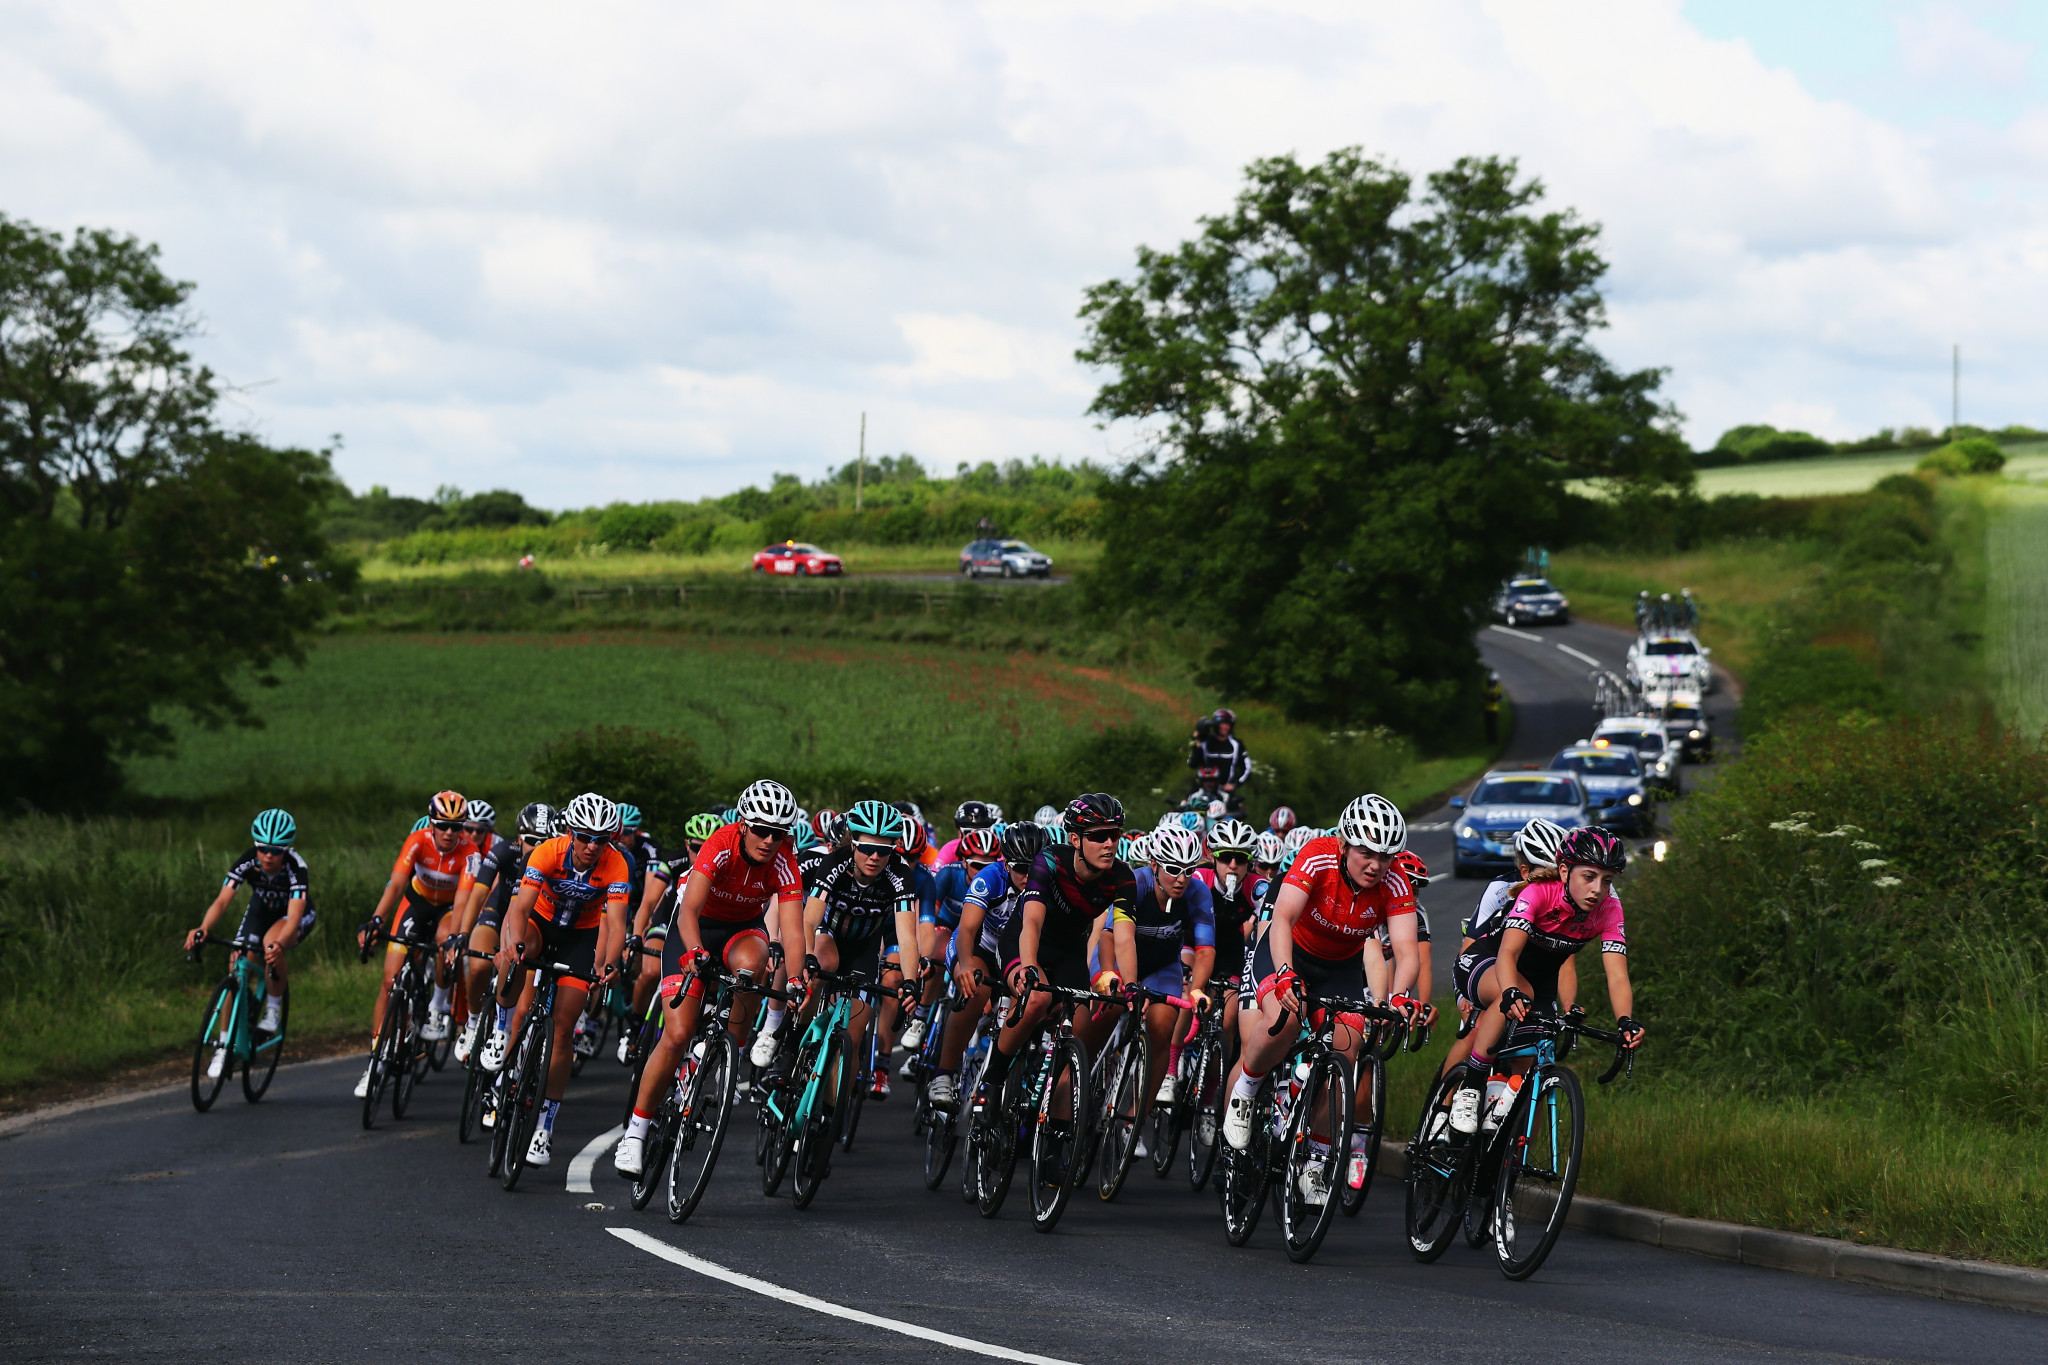 British Cycling is looking to reschedule a number of events that were originally due to take place in April, May and June ©Getty Images